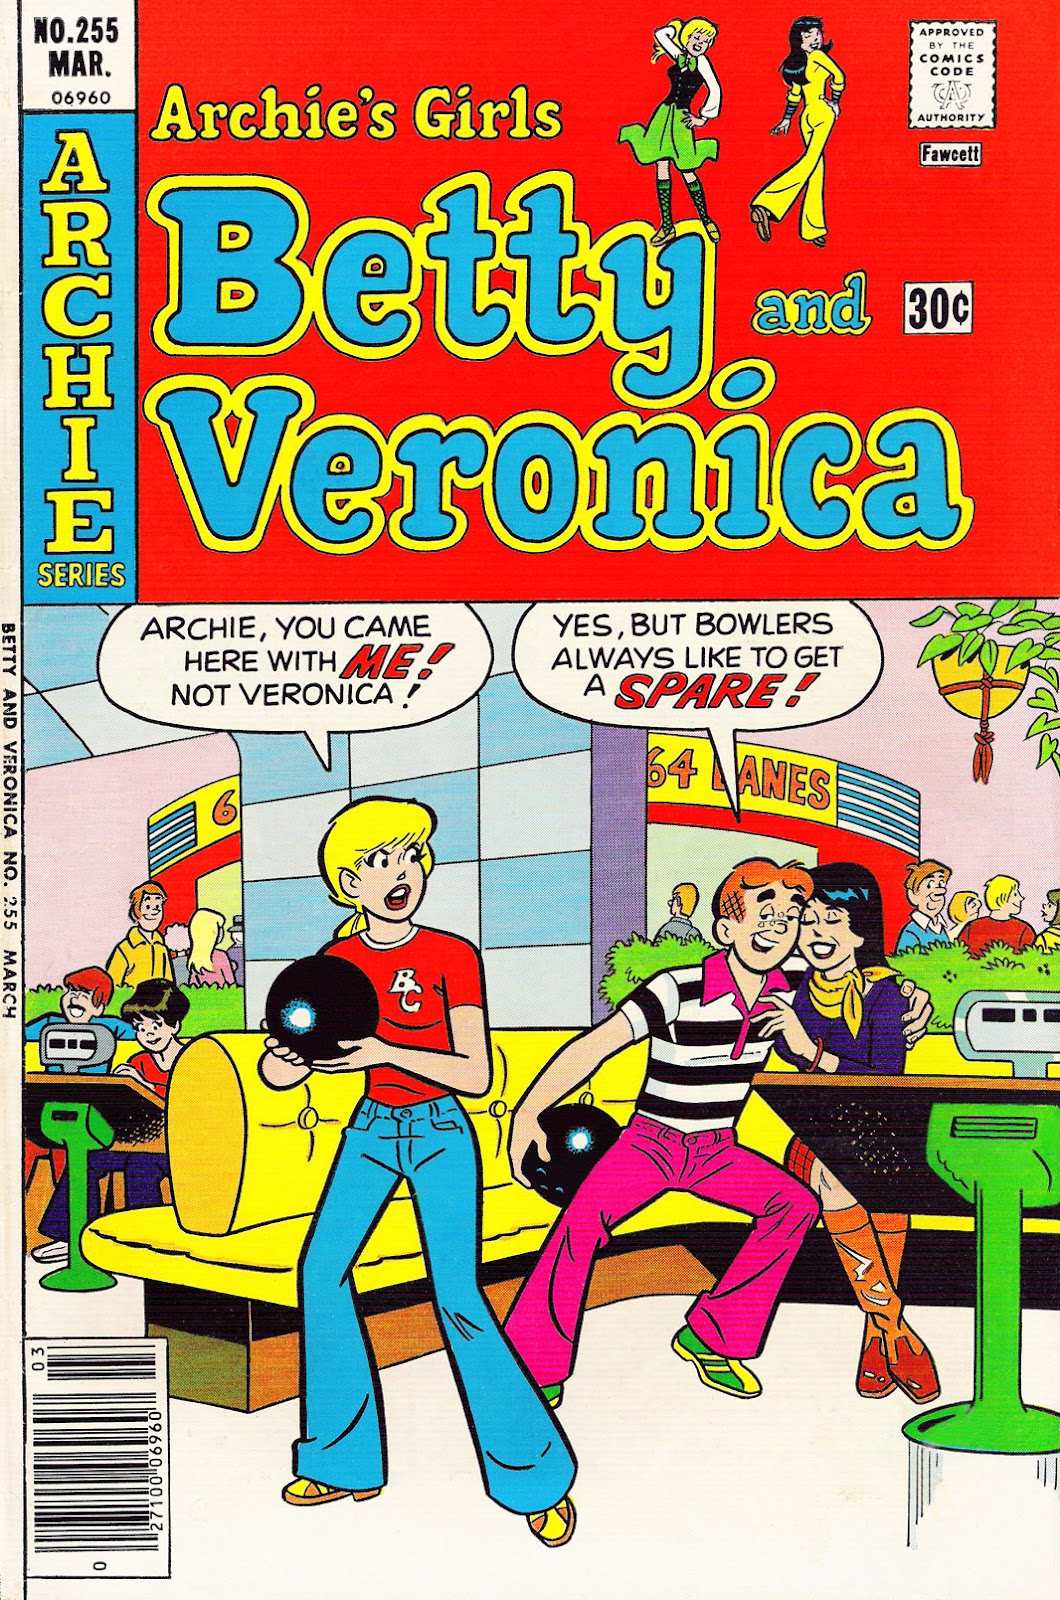 Archie's Girls Betty and Veronica 255 Page 1